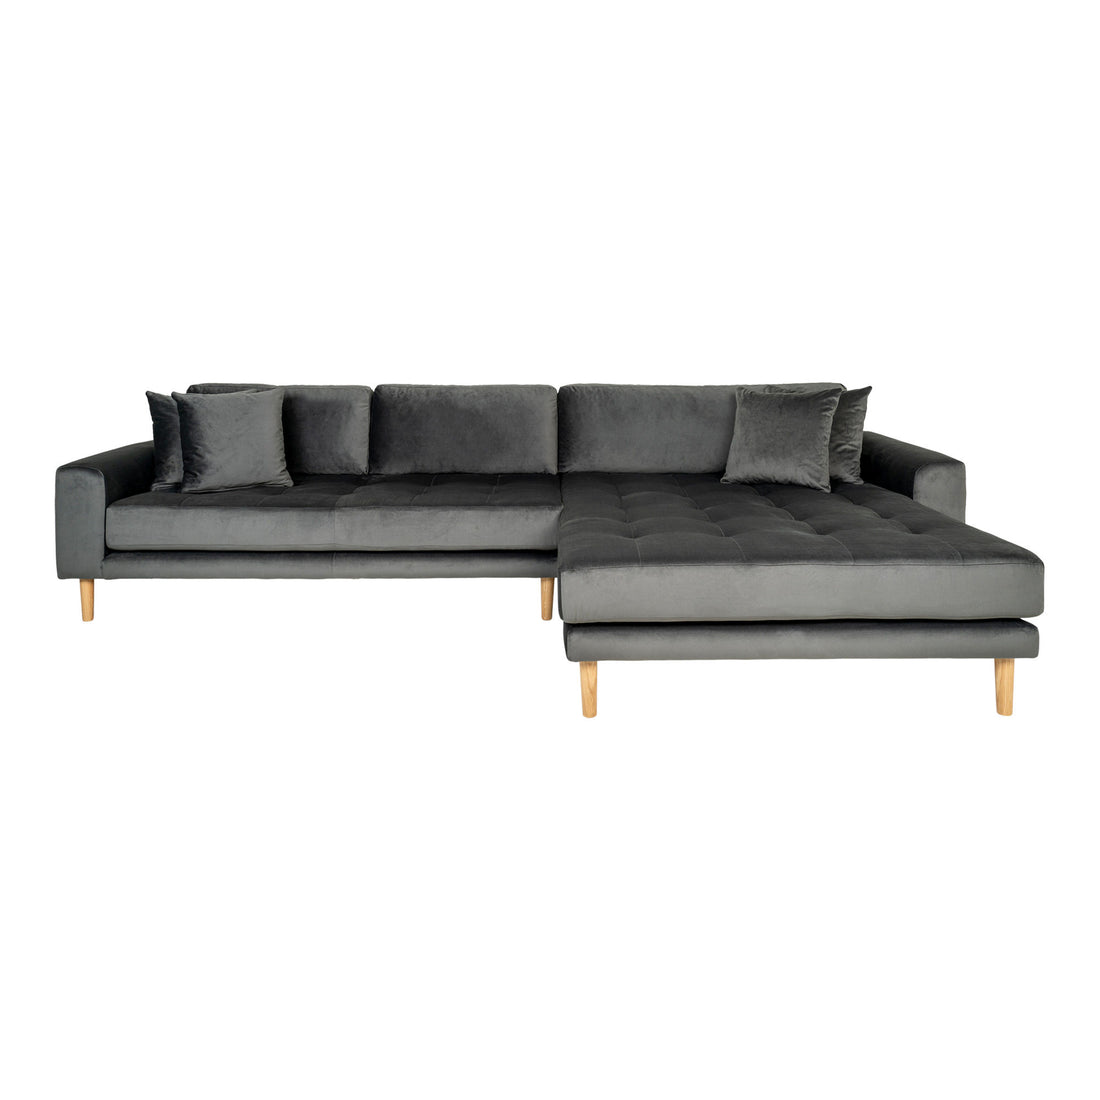 Lido Lounge Sofa - Lounge Sofa, right -wing in velor, dark gray with four pillows and nature wooden legs, HN1013 - 1 - pcs